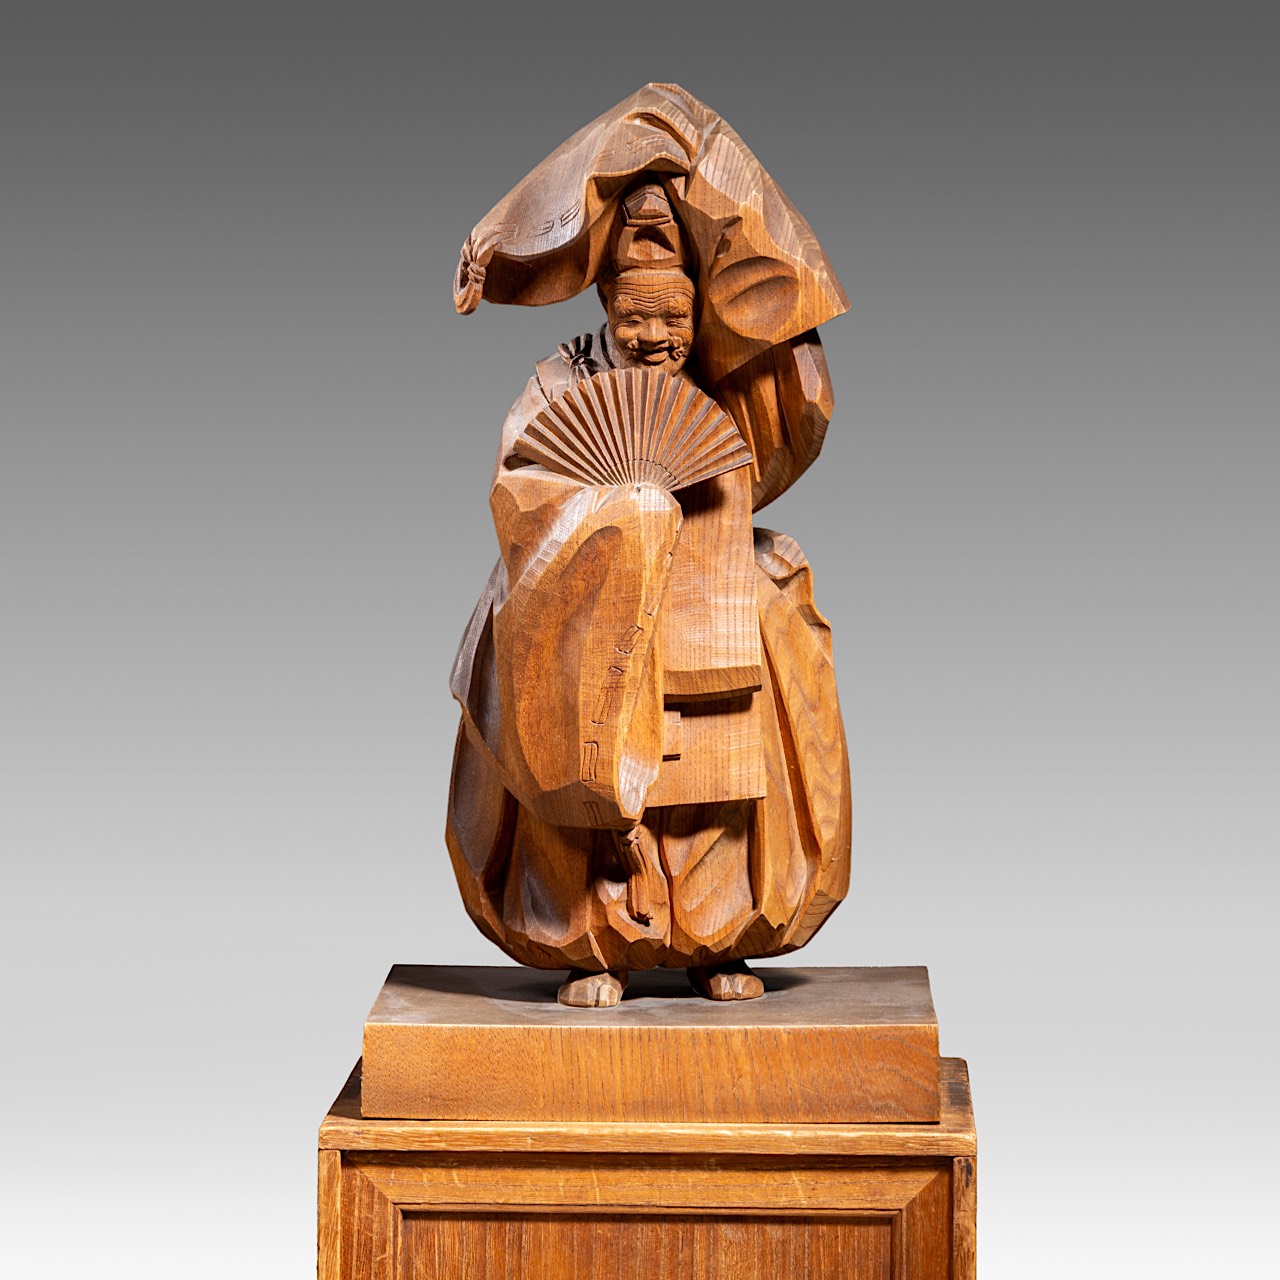 A Japanese cherrywood sculpture of a dancing man, signed Toshiaki Shimamura, total H 47 - 25,5 x 23